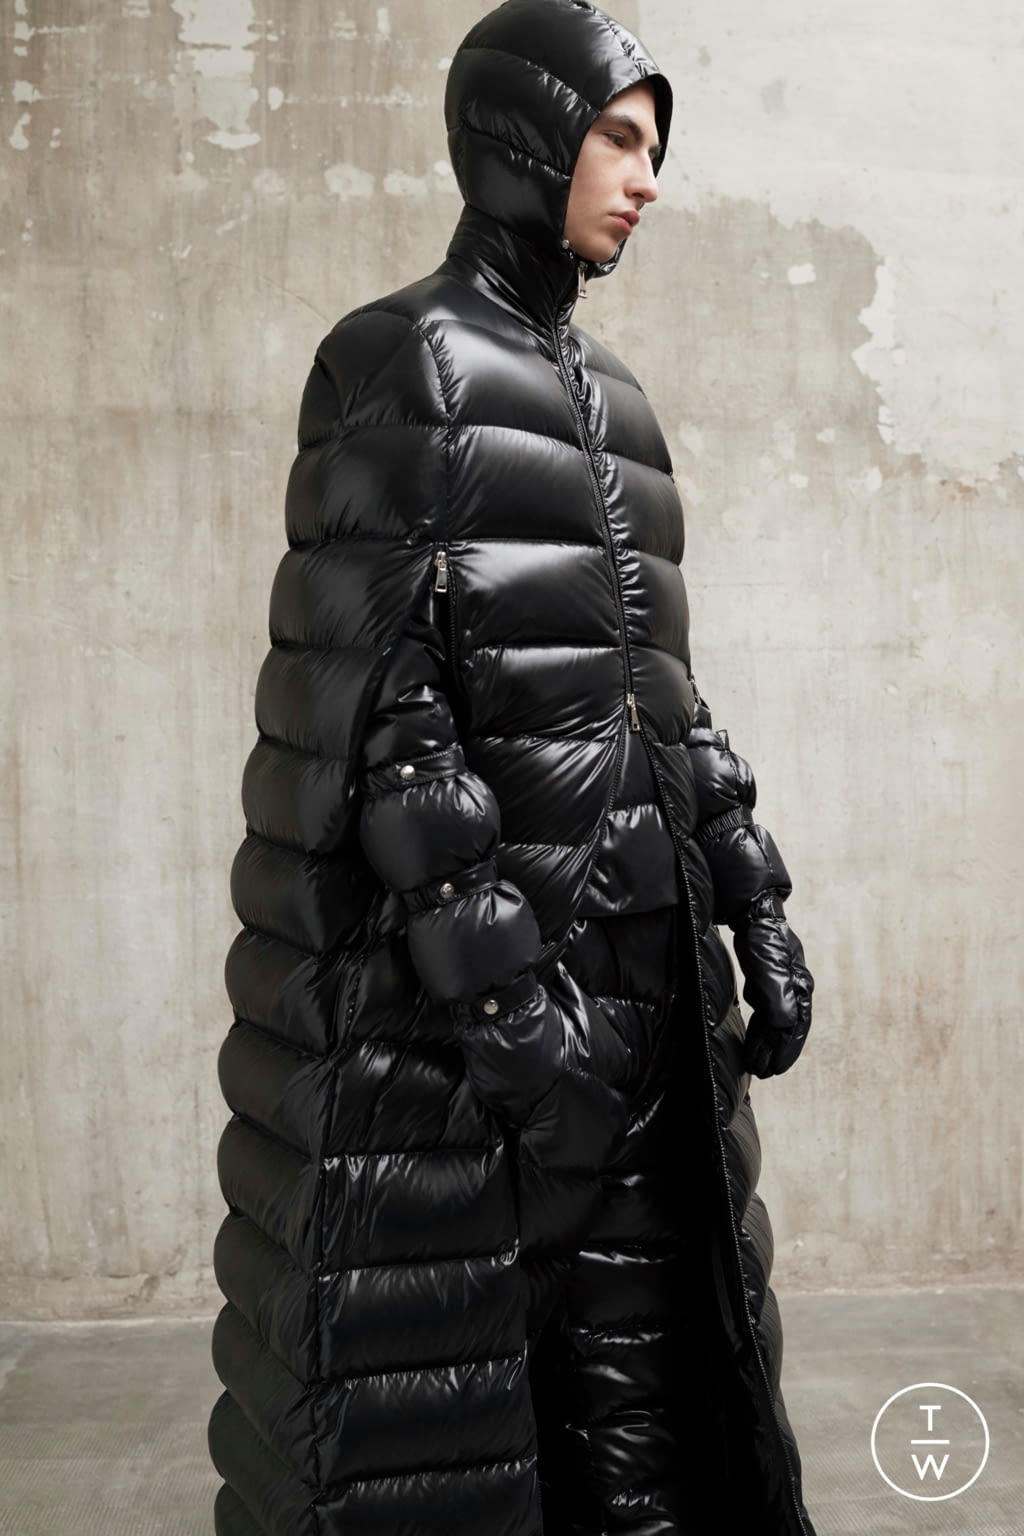 moncler new collection 2018